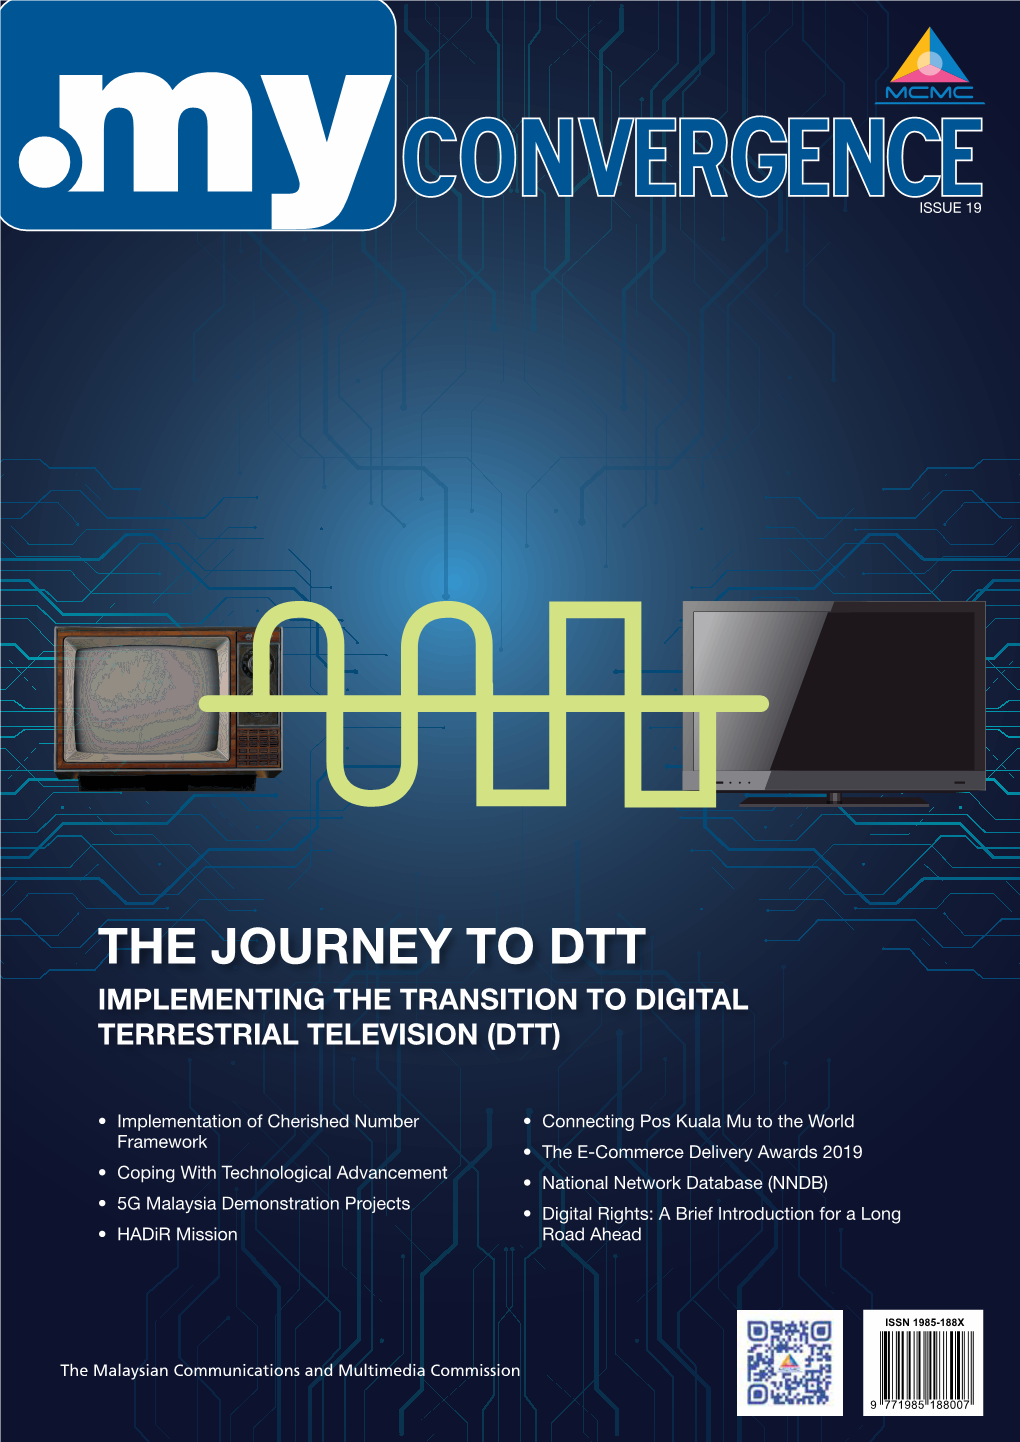 The Journey to Dtt Implementing the Transition to Digital Terrestrial Television (Dtt)